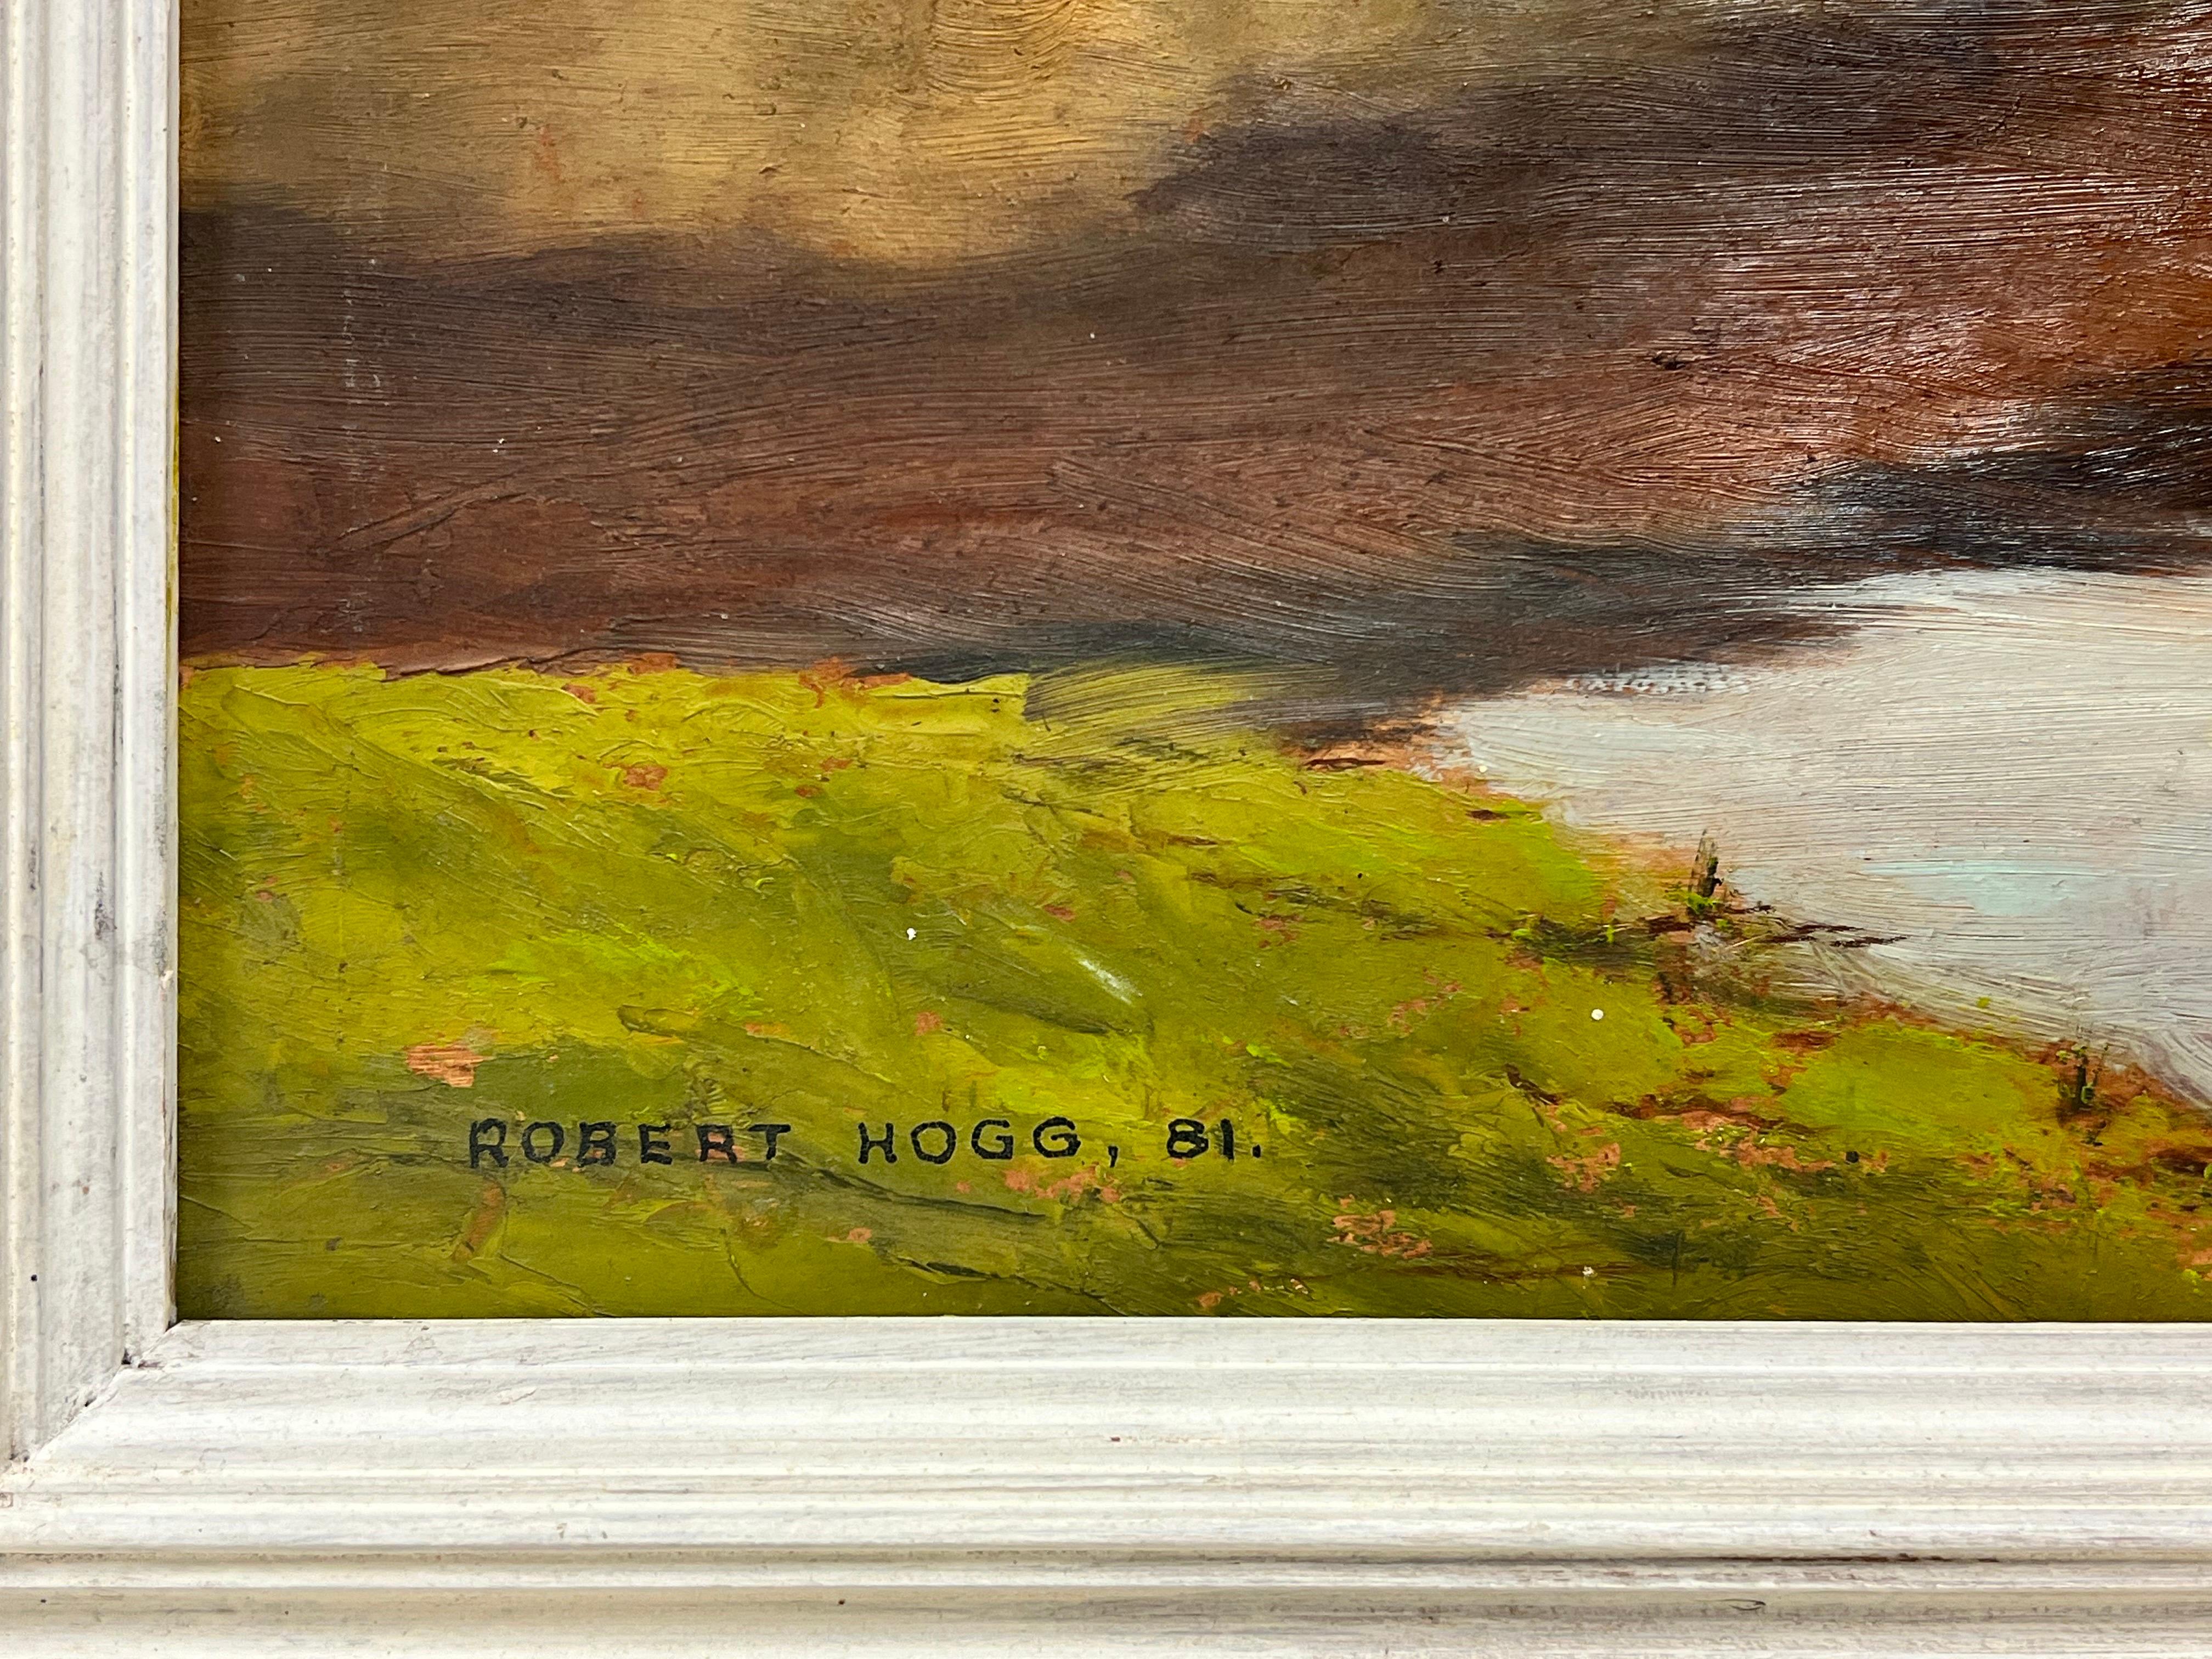 Artist/ School: Robert Hogg 1981, signed and inscribed verso

Title: 'Storm Clouds Over Fleetwith PiKe Buttermere'

Medium: oil on board, framed 

Framed: 21 x 30 inches
Board: 18 x 27 inches

Provenance: private collection, England

Condition: The